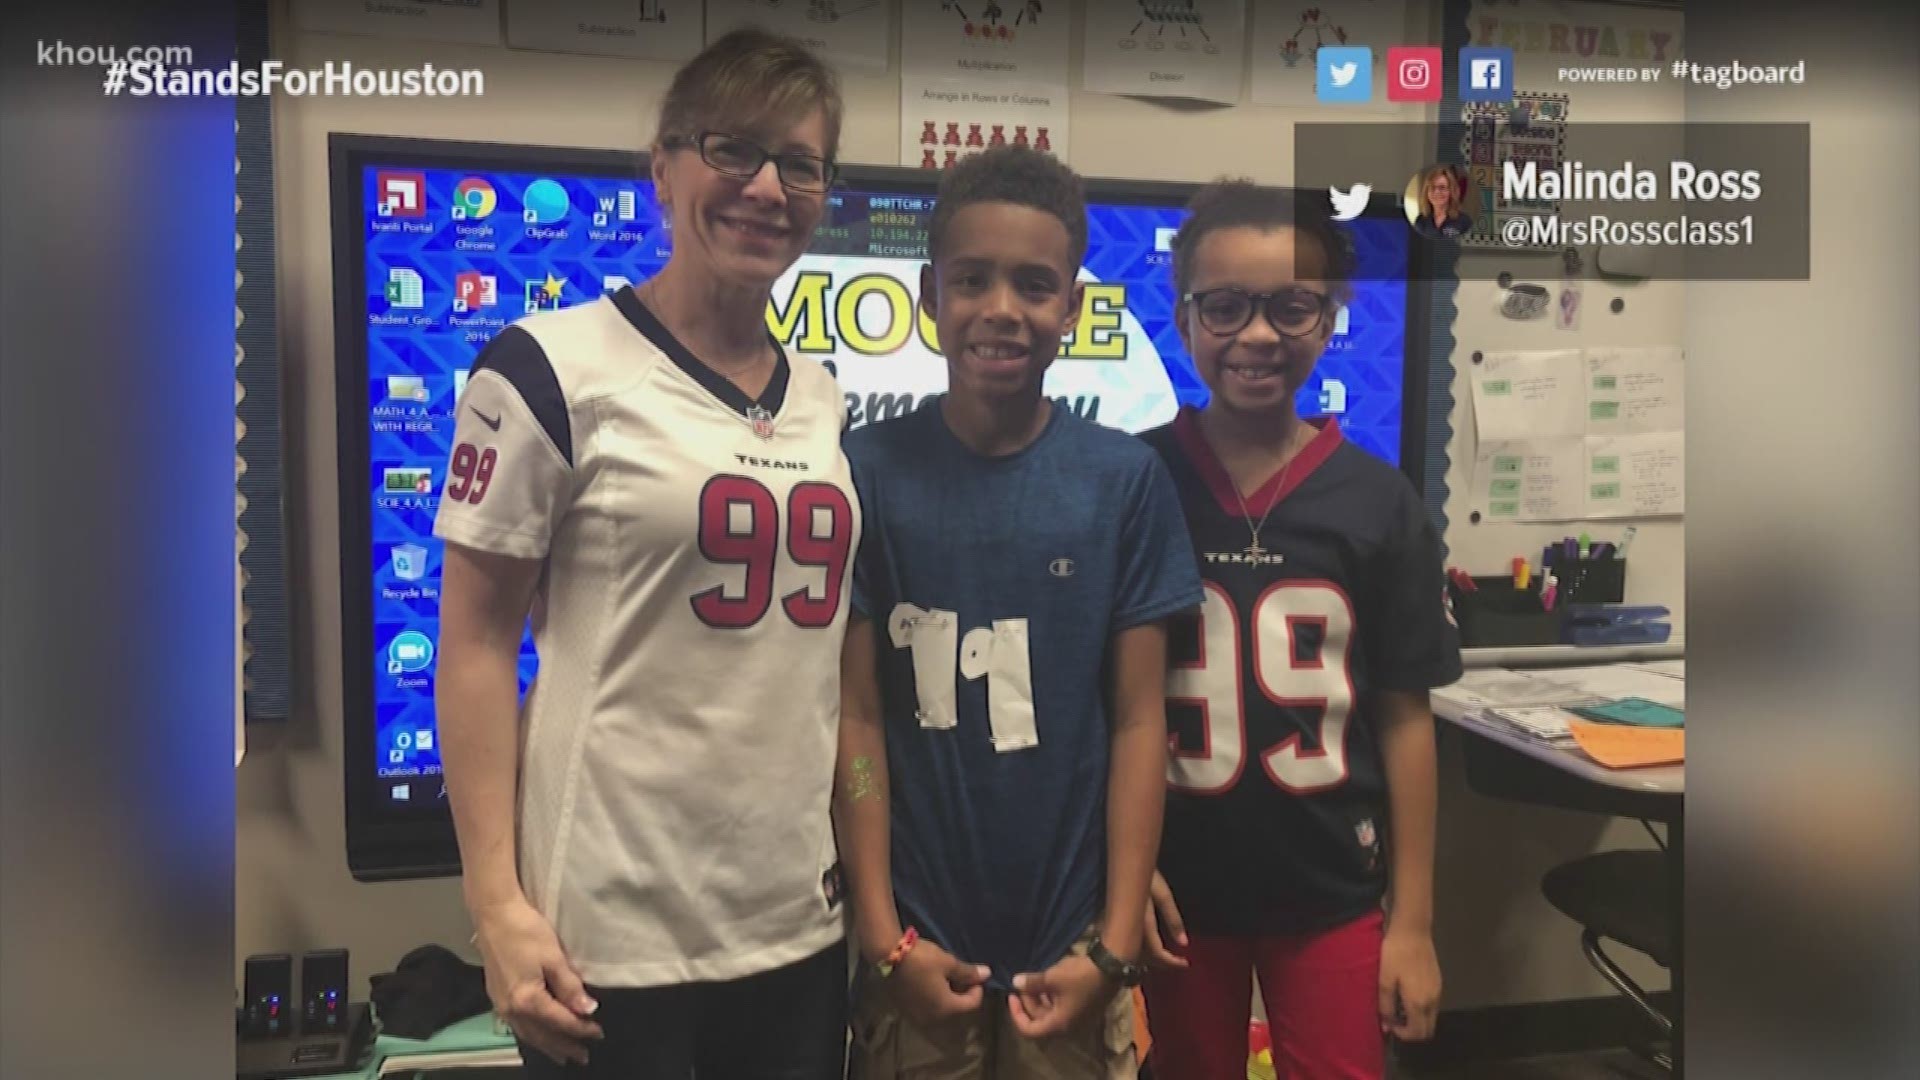 A Moore Elementary student's T-shirt caught Watt’s eye, who tweeted, “My man in the middle making the extra effort!! DM me an address and I’ll make sure we get him a real jersey!"